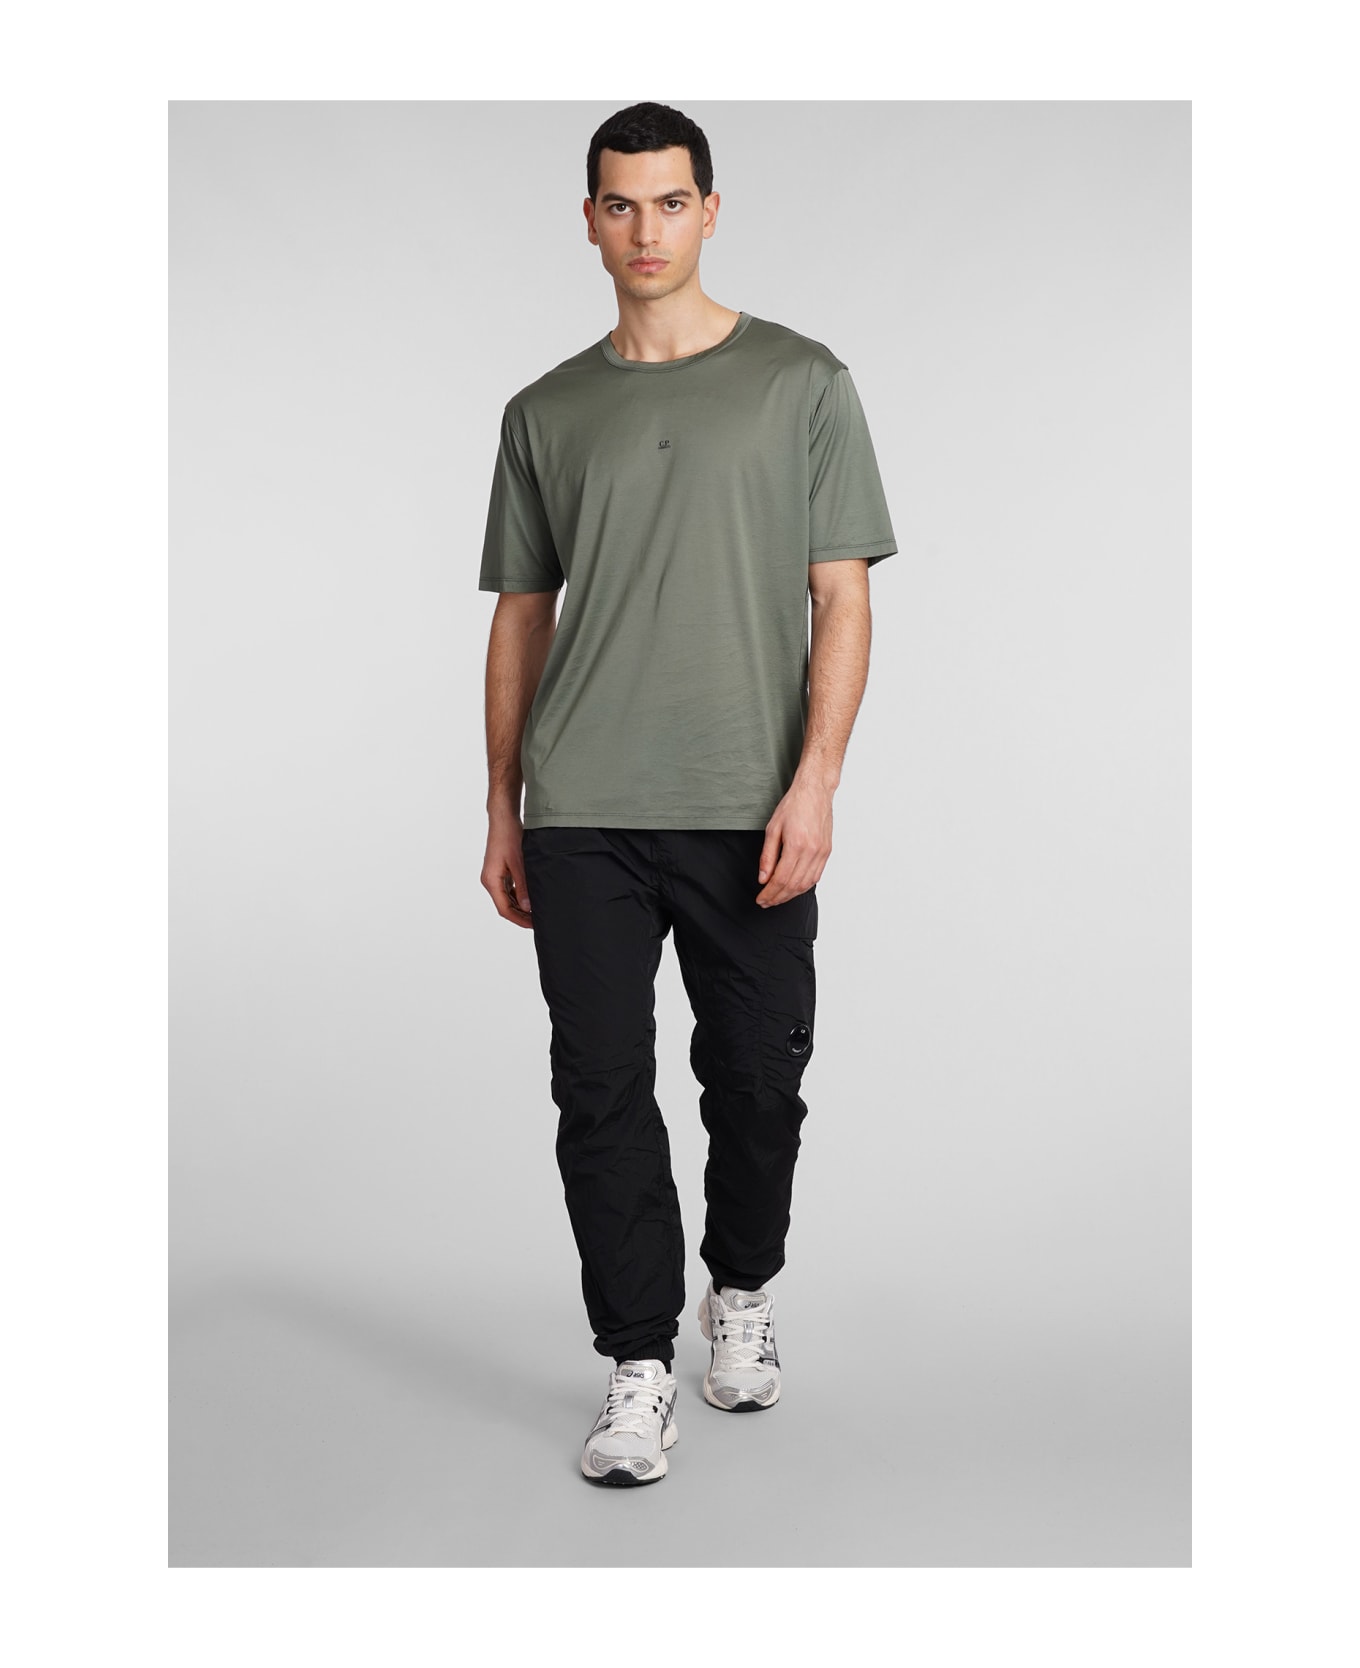 C.P. Company T-shirt In Green Cotton - green